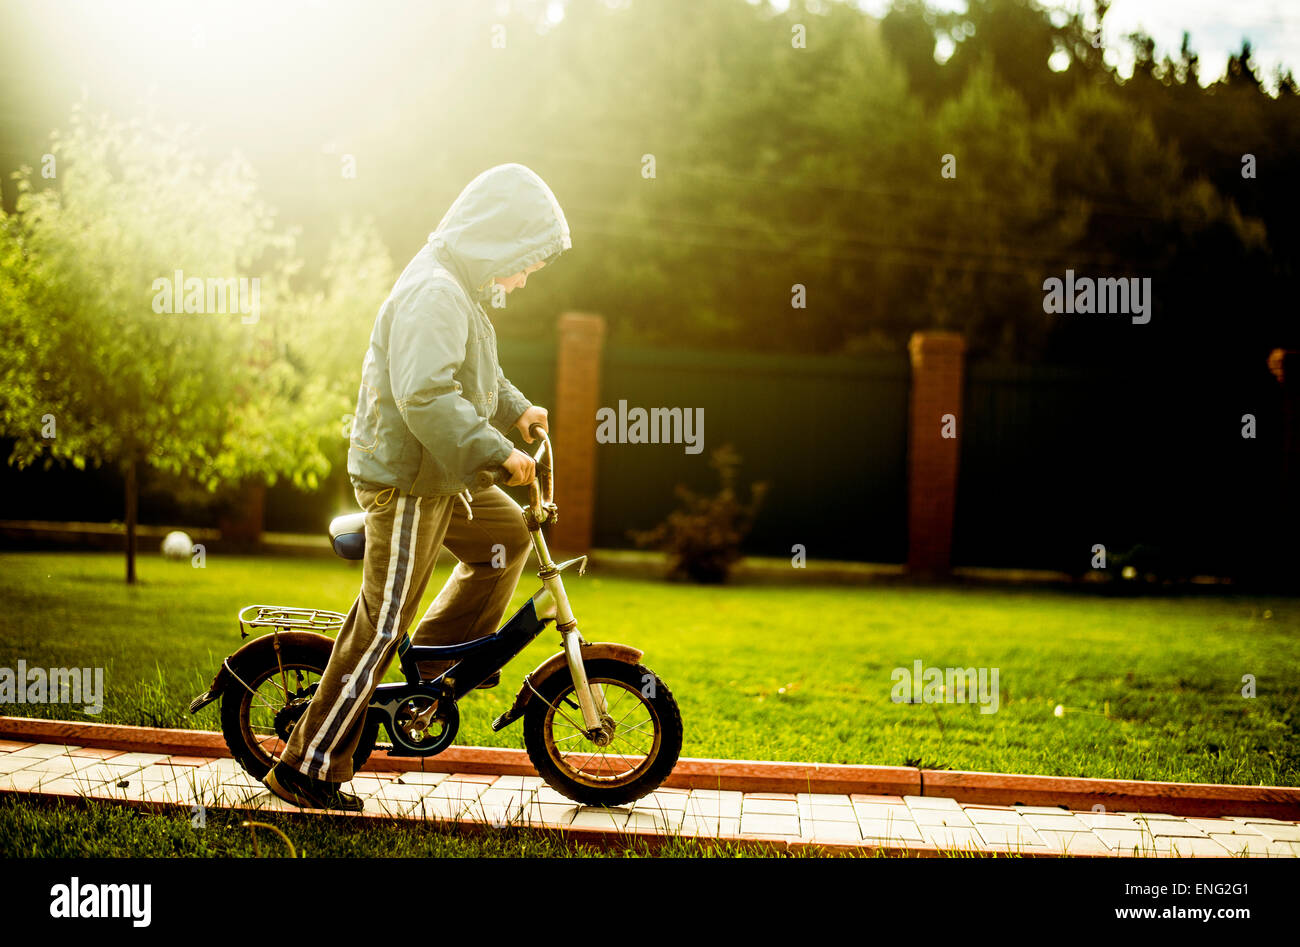 Caucasian boy riding bicycle in backyard Banque D'Images